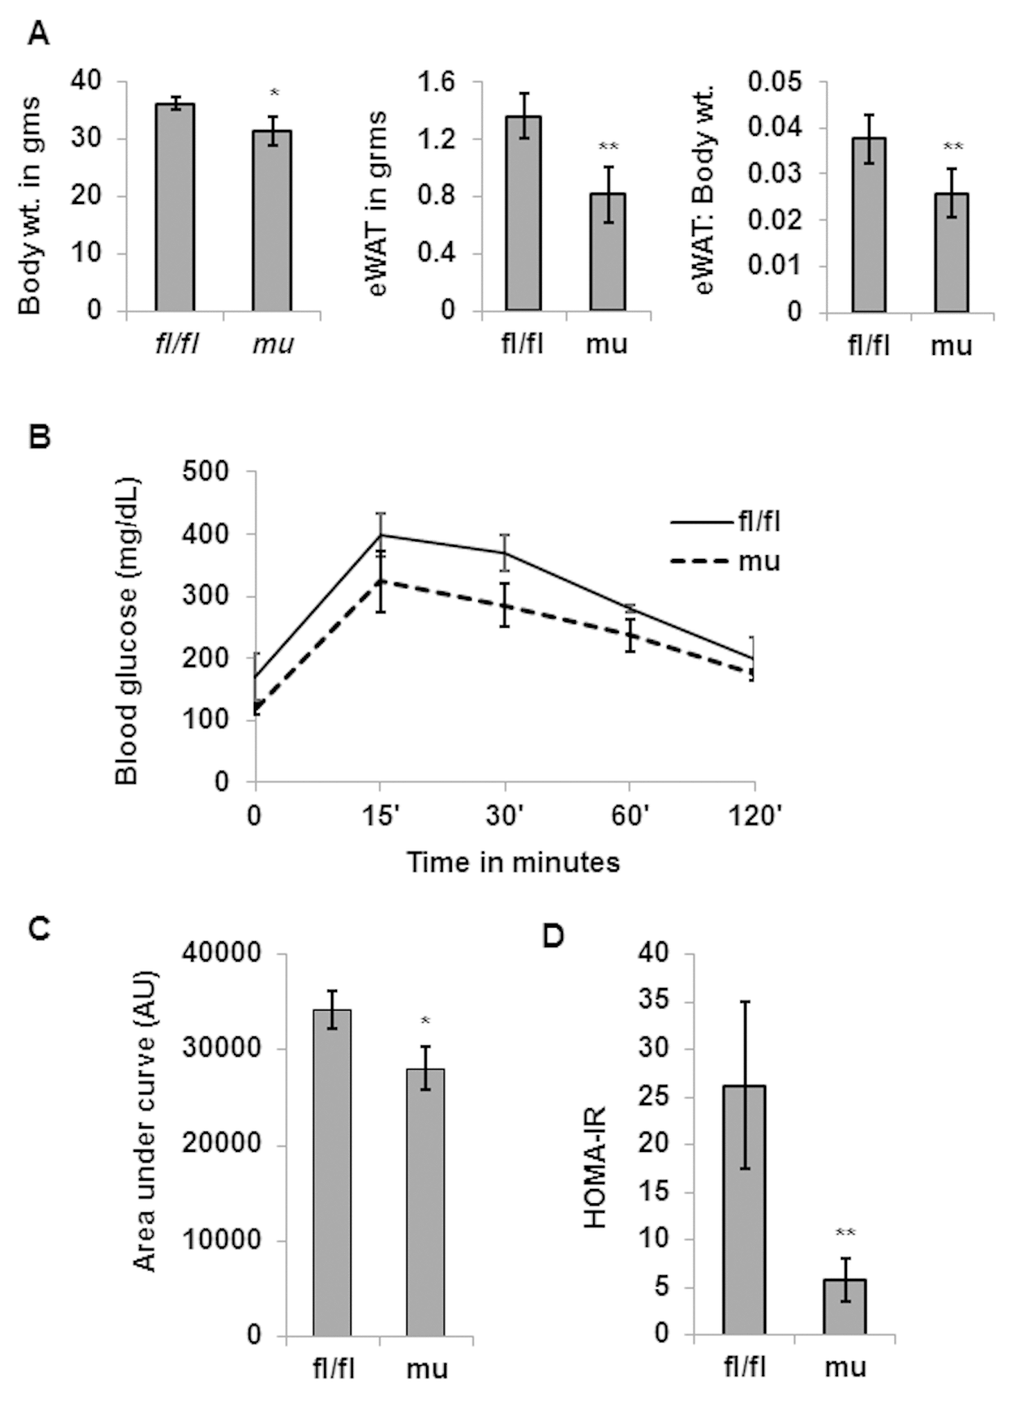 Decreased adiposity and increased glucose tolerance in aging Pik3c3 mutant mice. Total body weight and gWAT and gWAT: body weight ratio of male (24 MO) fl/fl and mutant mice (n=4 for each group) were plotted (A). Blood glucose levels in GTT were plotted (B) and area under the curve was plotted in (C). Insulin resistance was calculated by homeostatic model assessment of (HOMA) using fasting glucose and fasting insulin levels and plotted in D. The significance levels were analyzed by unpaired Student’s t-test using means and SDs and designated as *p0.05).